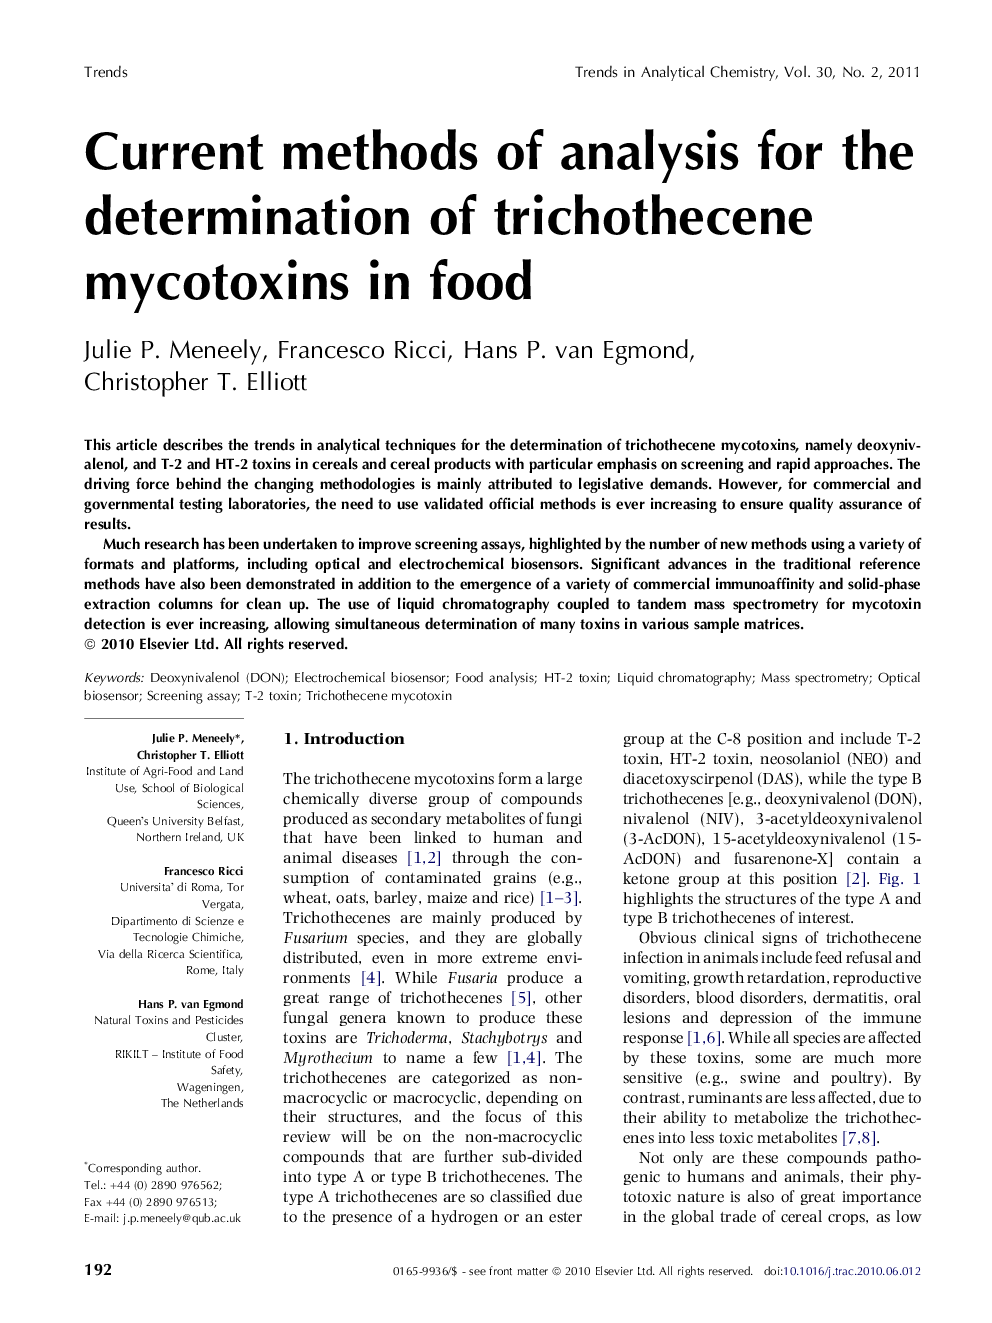 Current methods of analysis for the determination of trichothecene mycotoxins in food